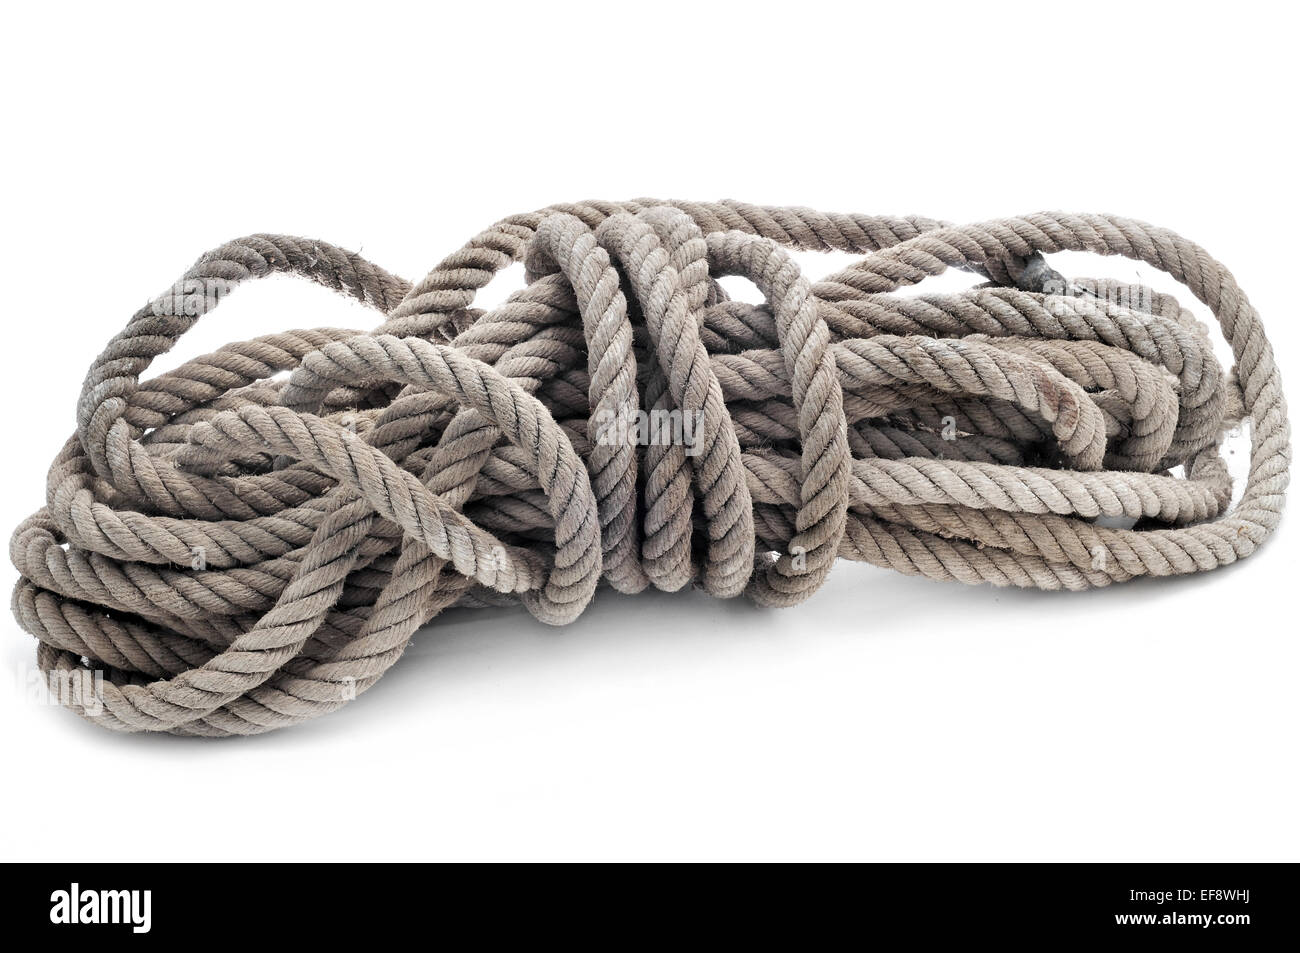 Premium Photo  Unwinding coil of strong rope isolated on a white surface